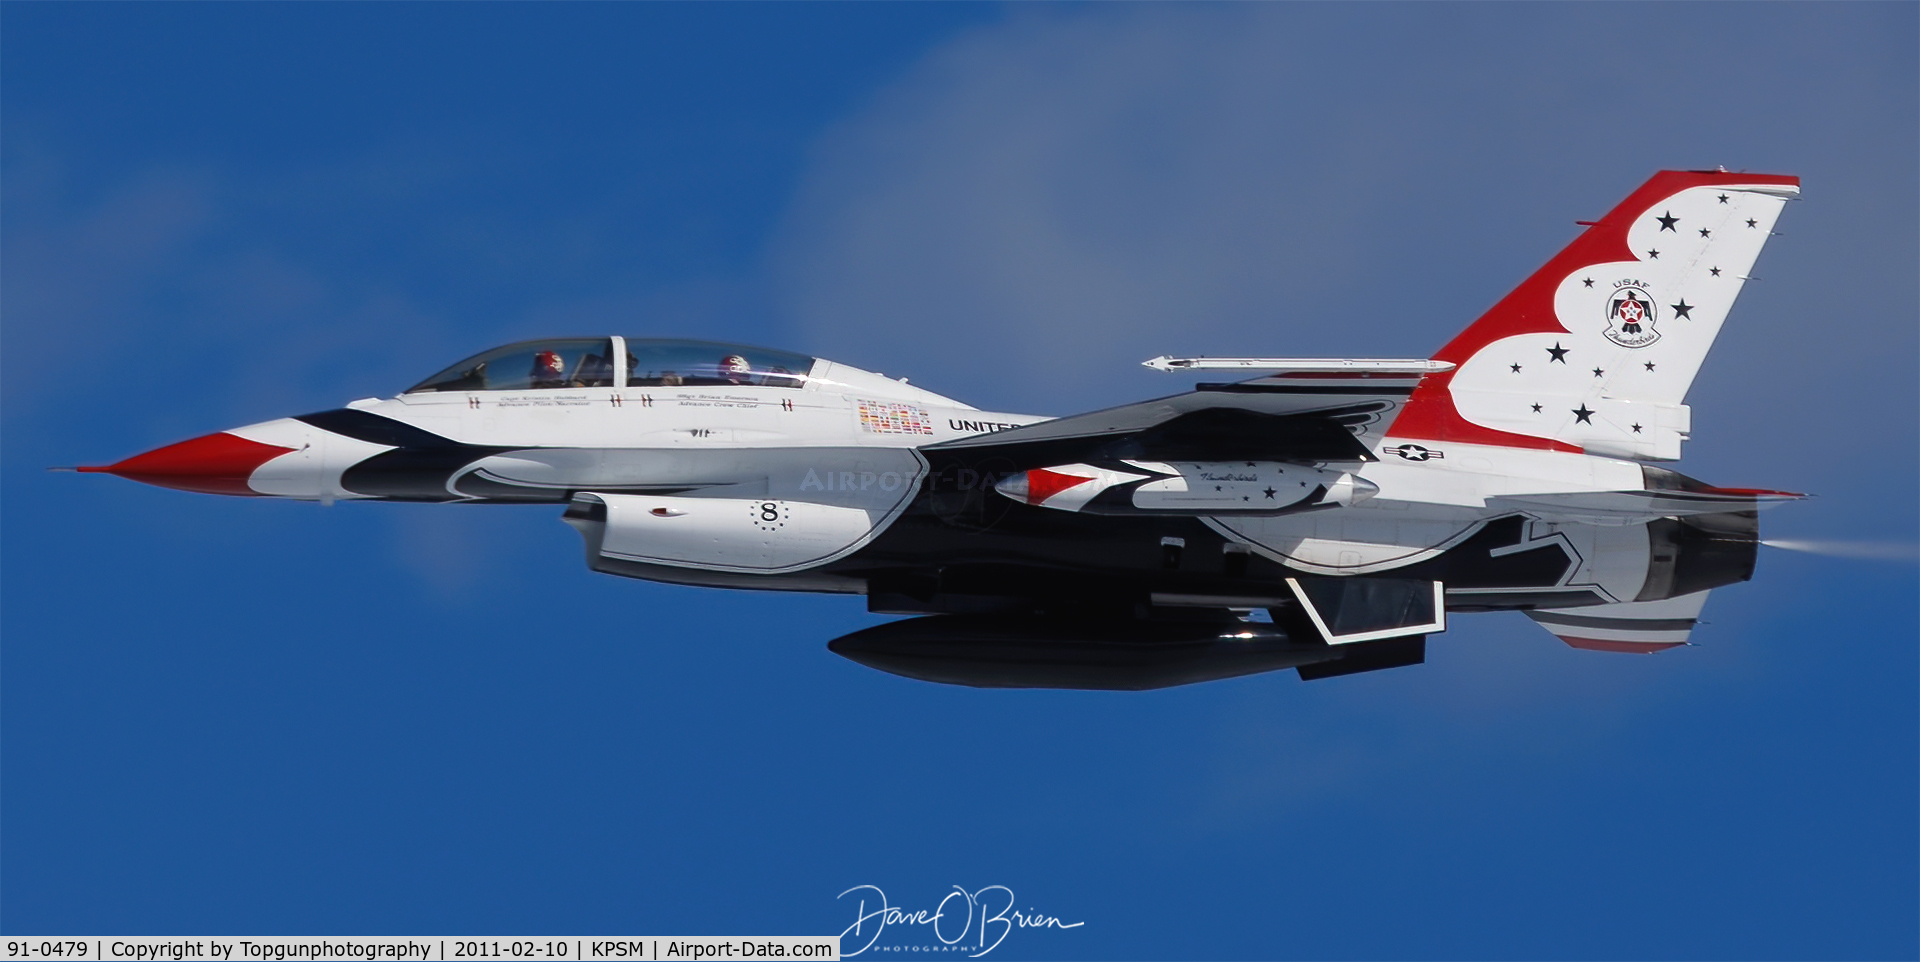 91-0479, 1991 General Dynamics F-16D Fighting Falcon C/N CD-34, Thunderbird #8 arriving for preshow planning